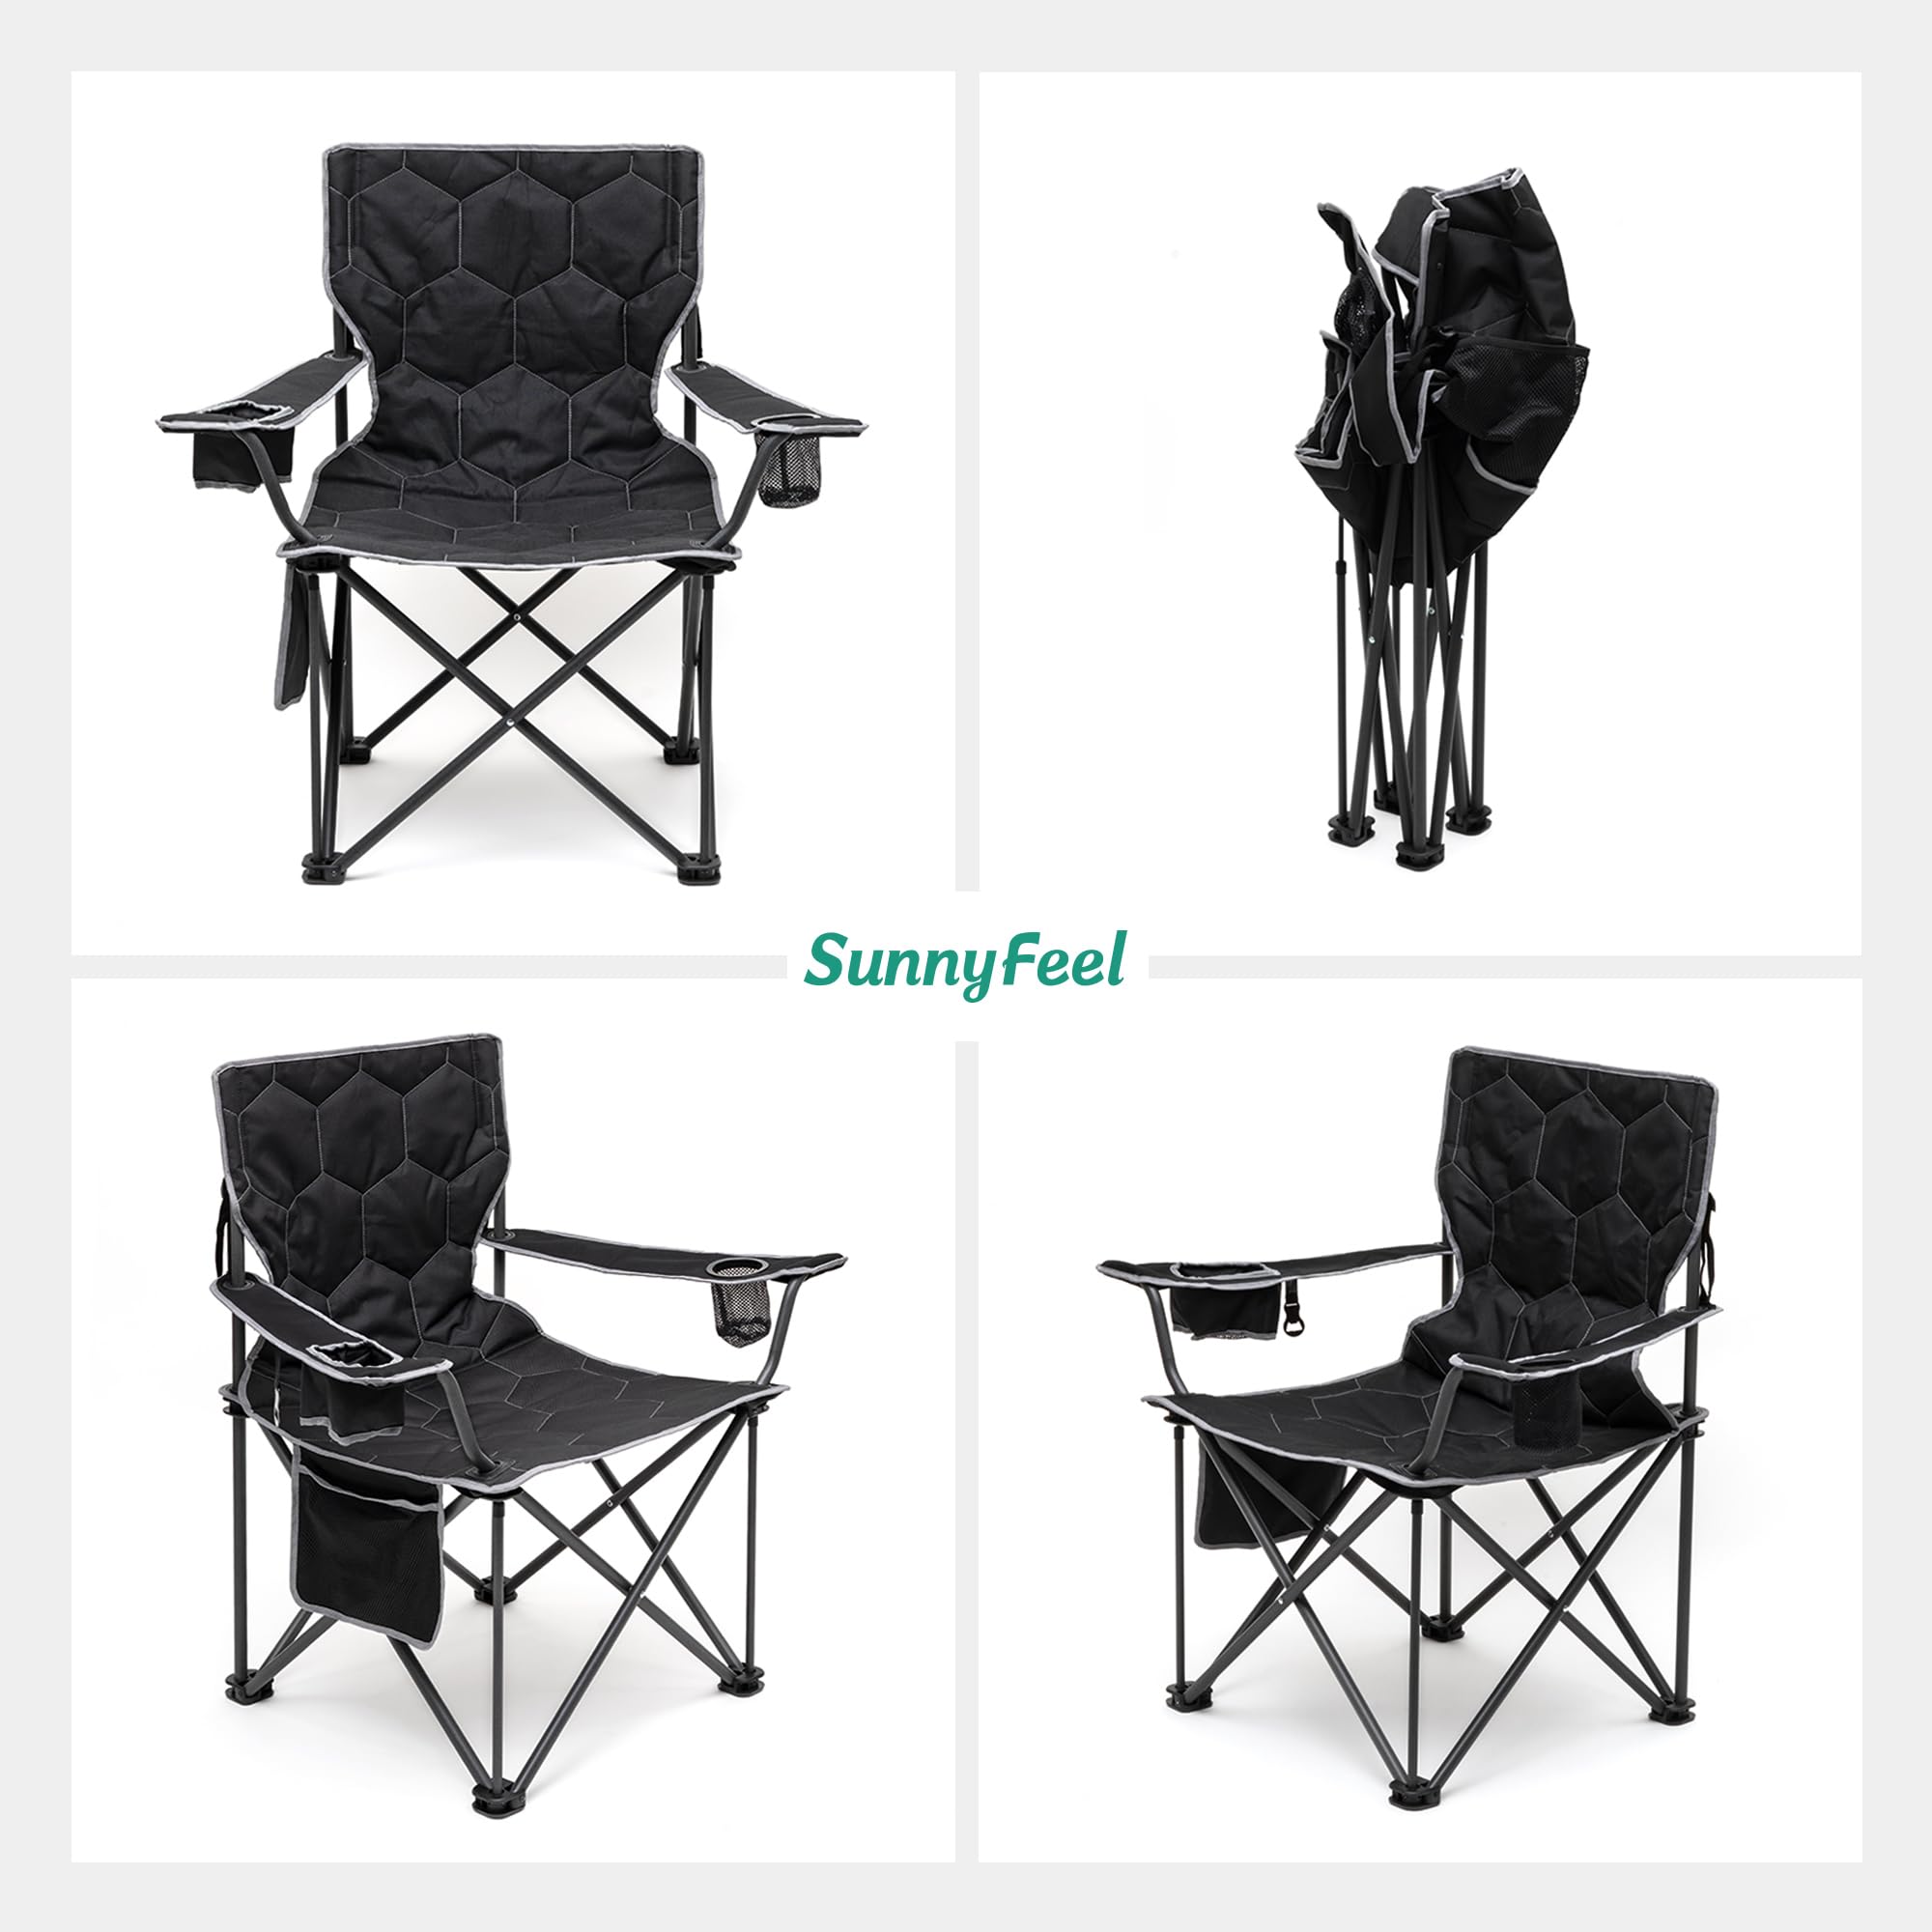 SUNNYFEEL XXL Oversized Camping Chair Heavy Duty 500 LBS for Big Tall People Above 6'4 Padded Portable Folding Sports Lawn Chairs with Armrest Cup Holder & Pocket for Outdoor/Travel/Picnic/Camp